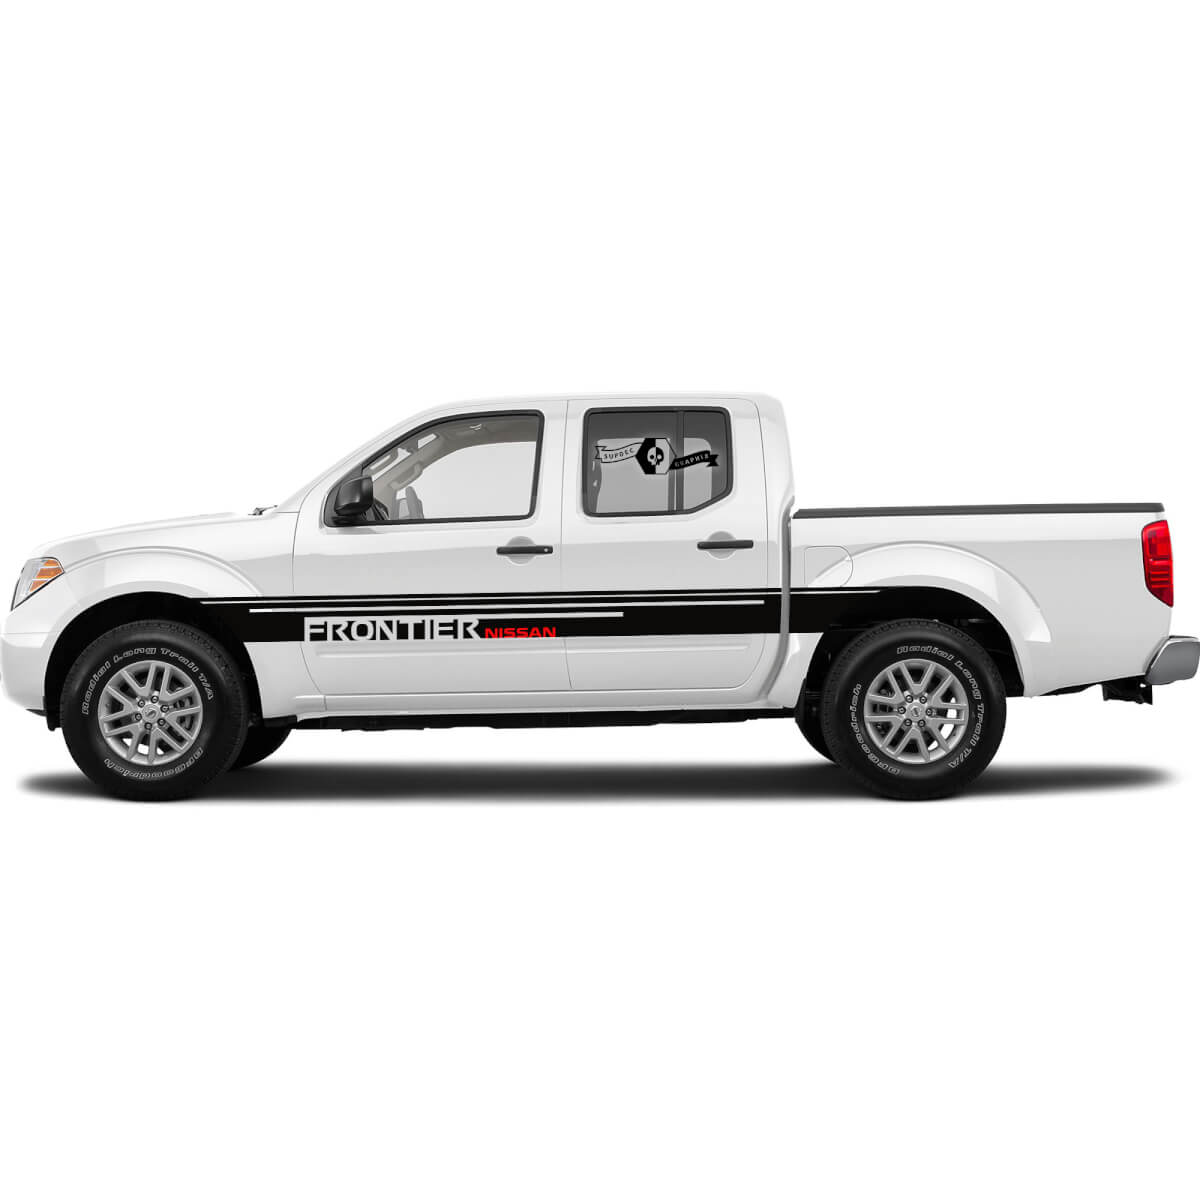 2 Nissan Frontier Accent Body Line Decal Sticker Graphic Side Stripe Doors two colour